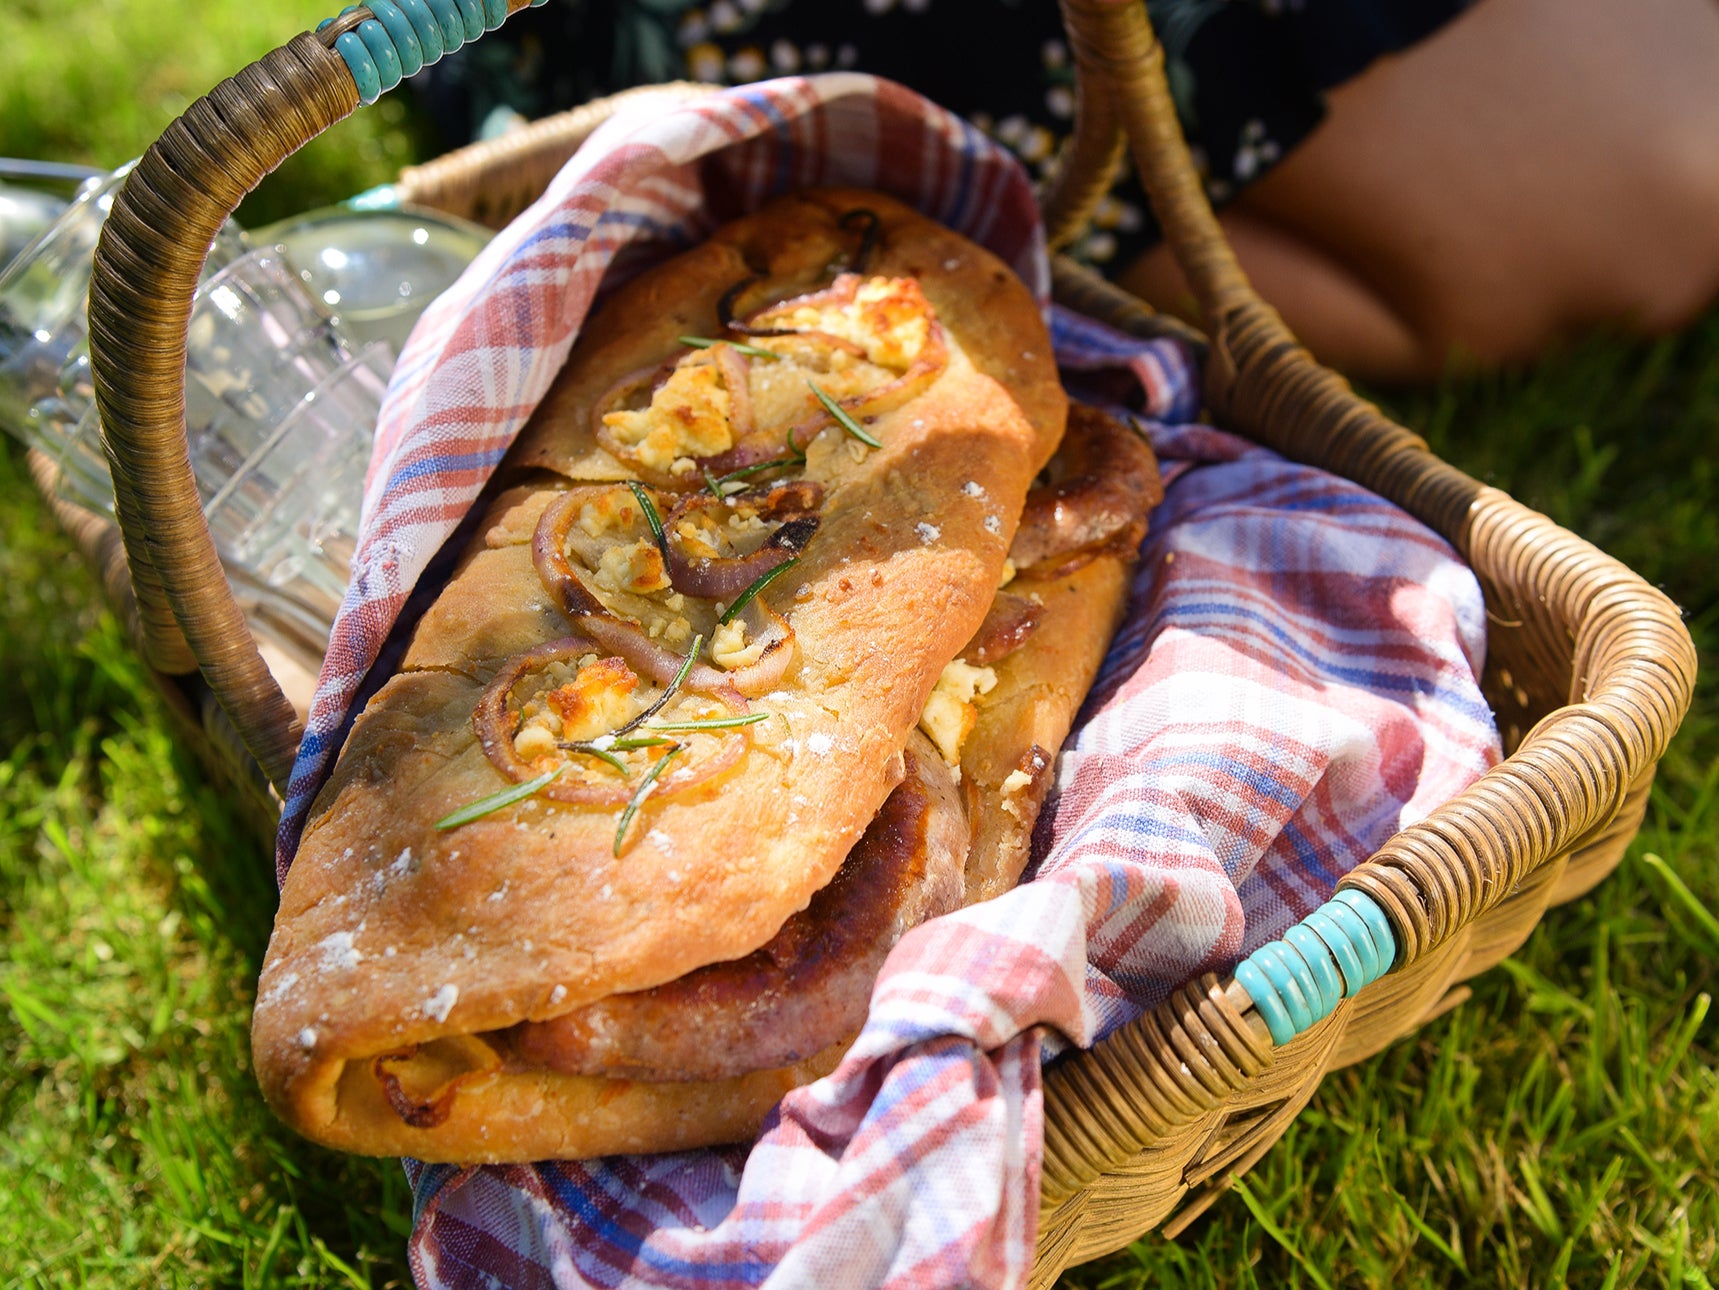 Although perfect for a picnic, you’ll want to remake these recipes again and again